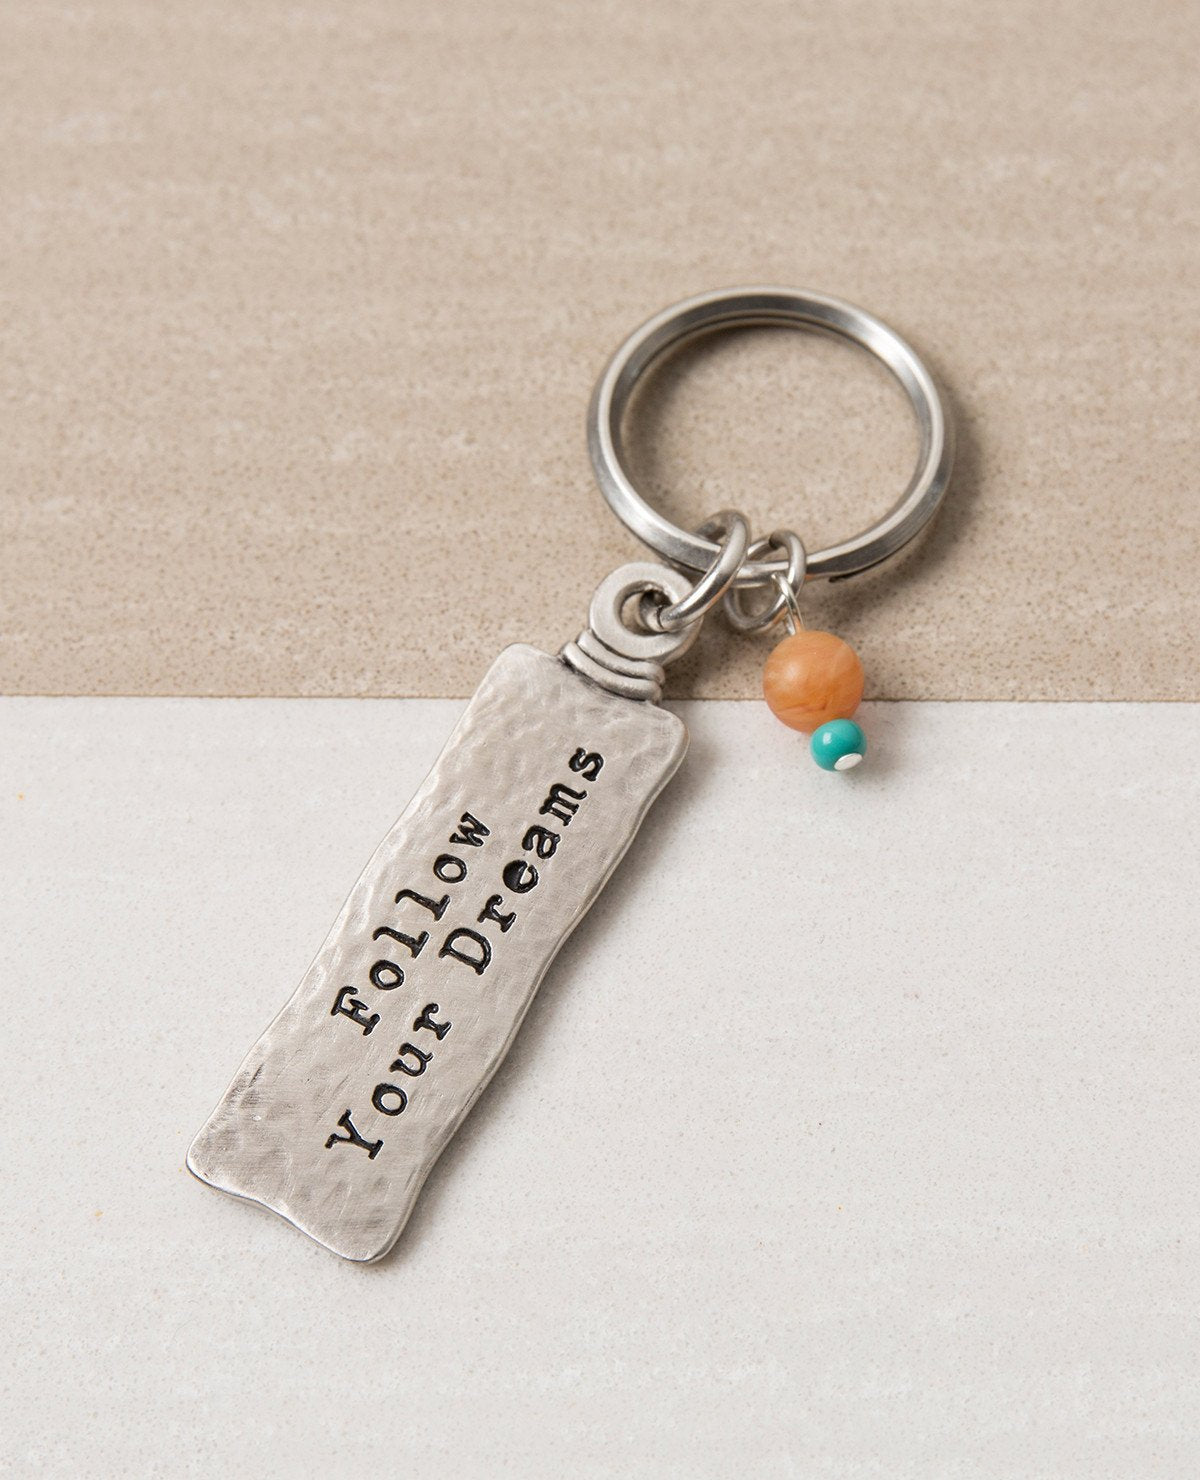 The gift that is most fun to give! A classically designed keychain - for him or for her. Shaped like an elongated rectangle with the words "Follow Your Dreams" on one side and embossed leaves decorating the other side. At the top of the keychain are two differently colored beads in the charming mix of orange and turquoise. The keychain is coated in sterling silver and is strong and reliable. A great gift to give to someone you love, anyone beginning a journey, or simply as a reminder that most important is 